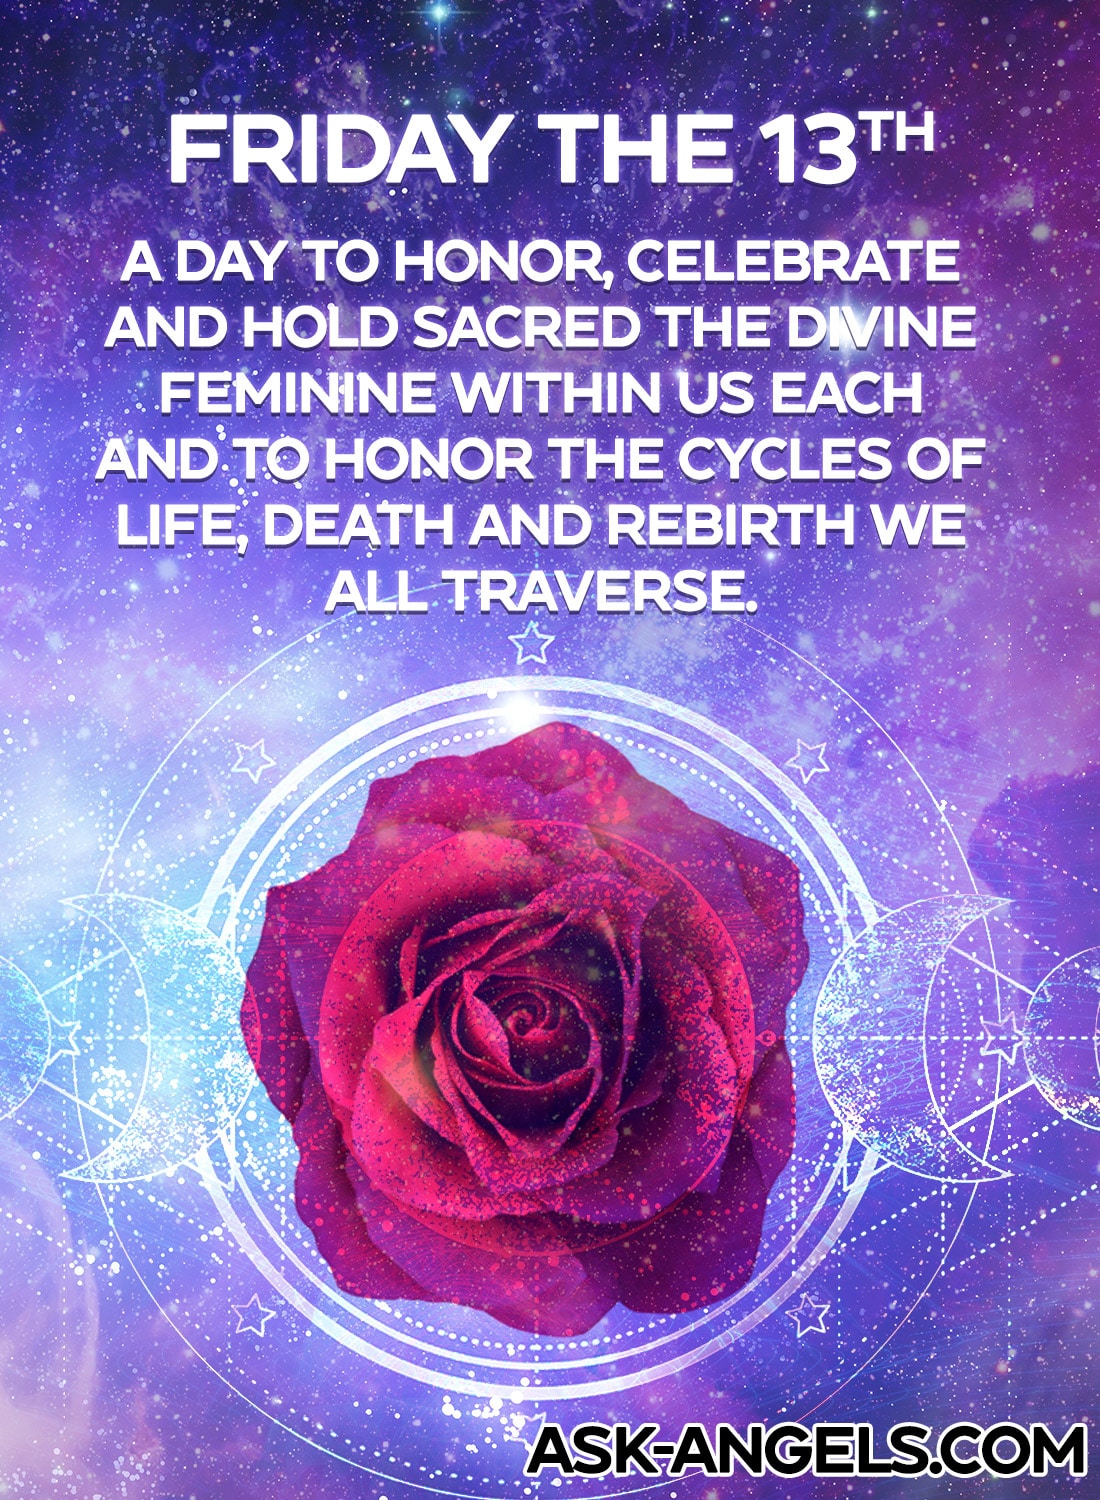 Friday the 13th and the Divine Feminine